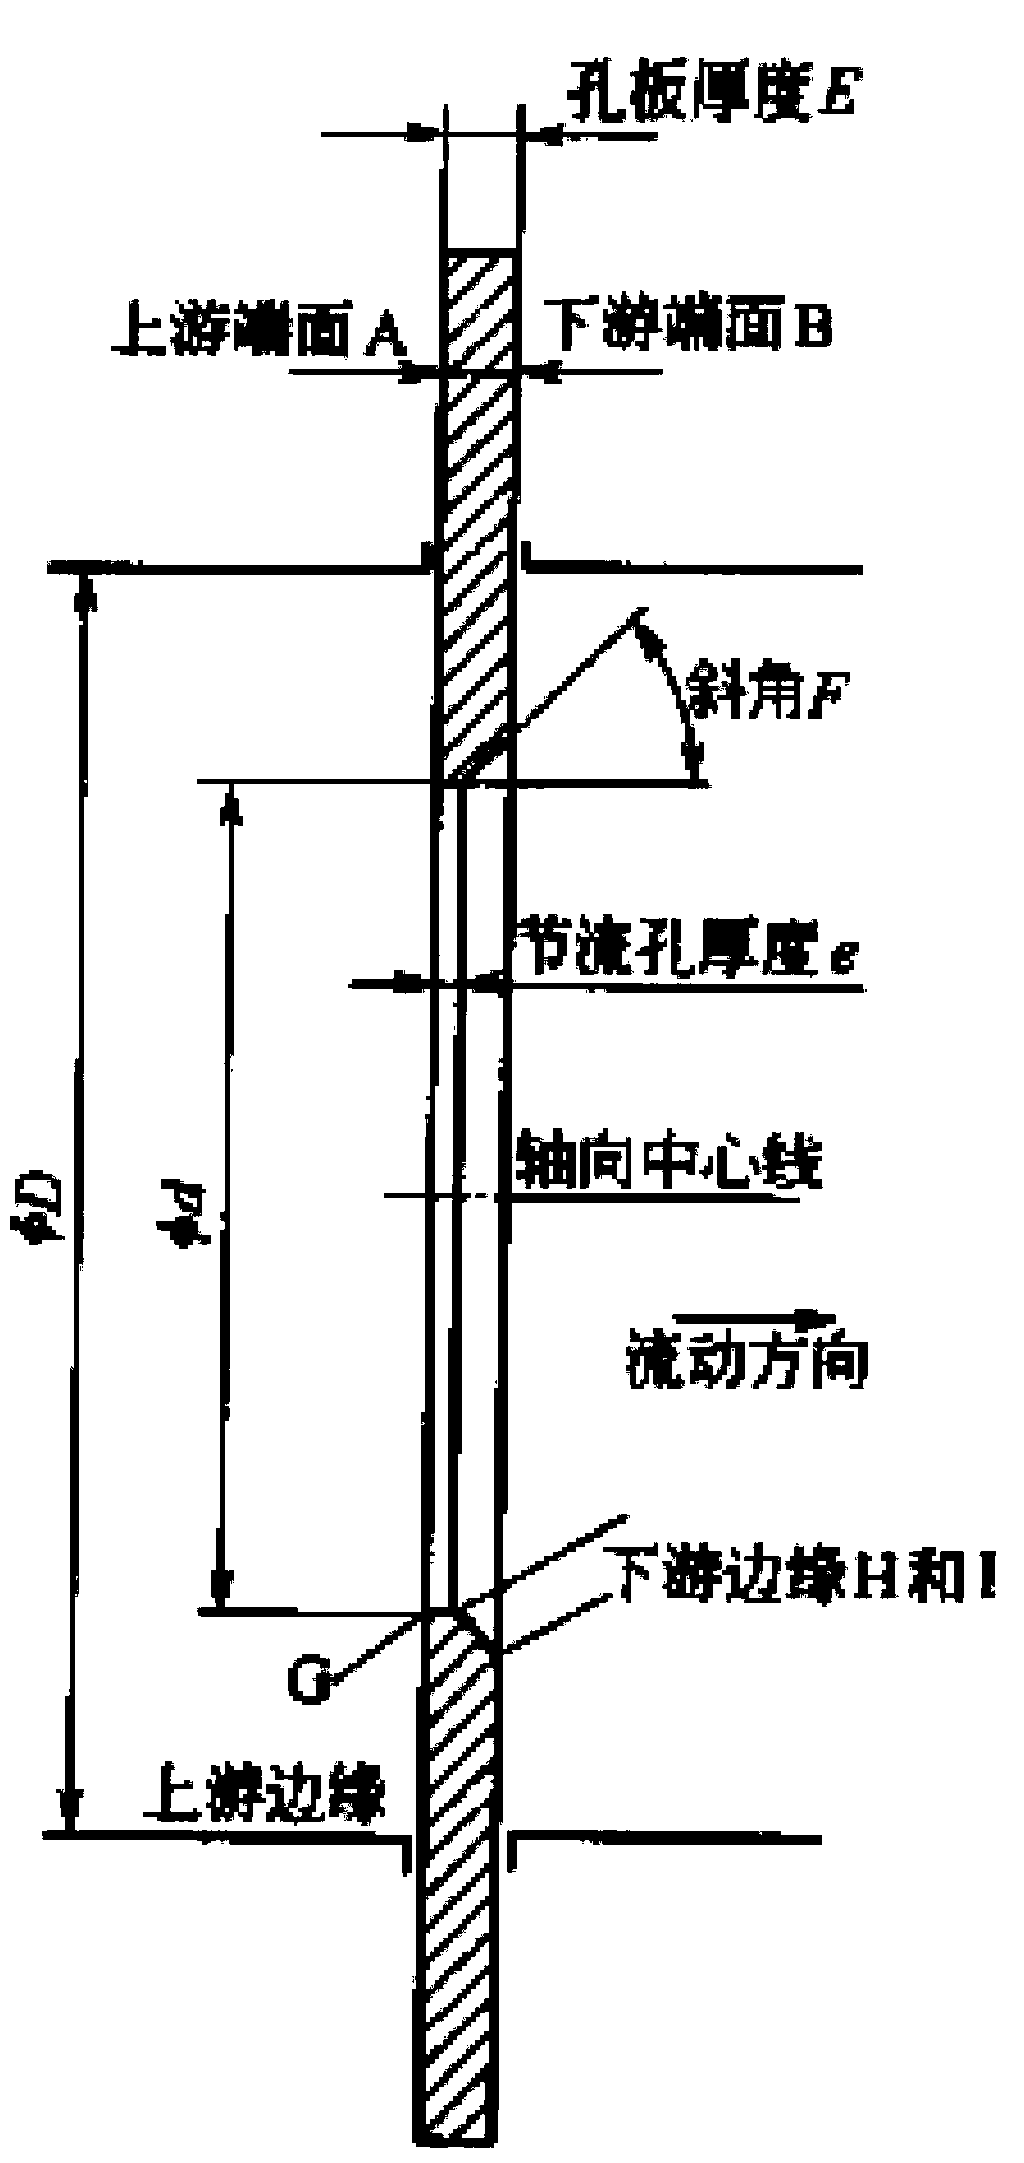 Nuclear power station thermal power measurement drift monitoring method